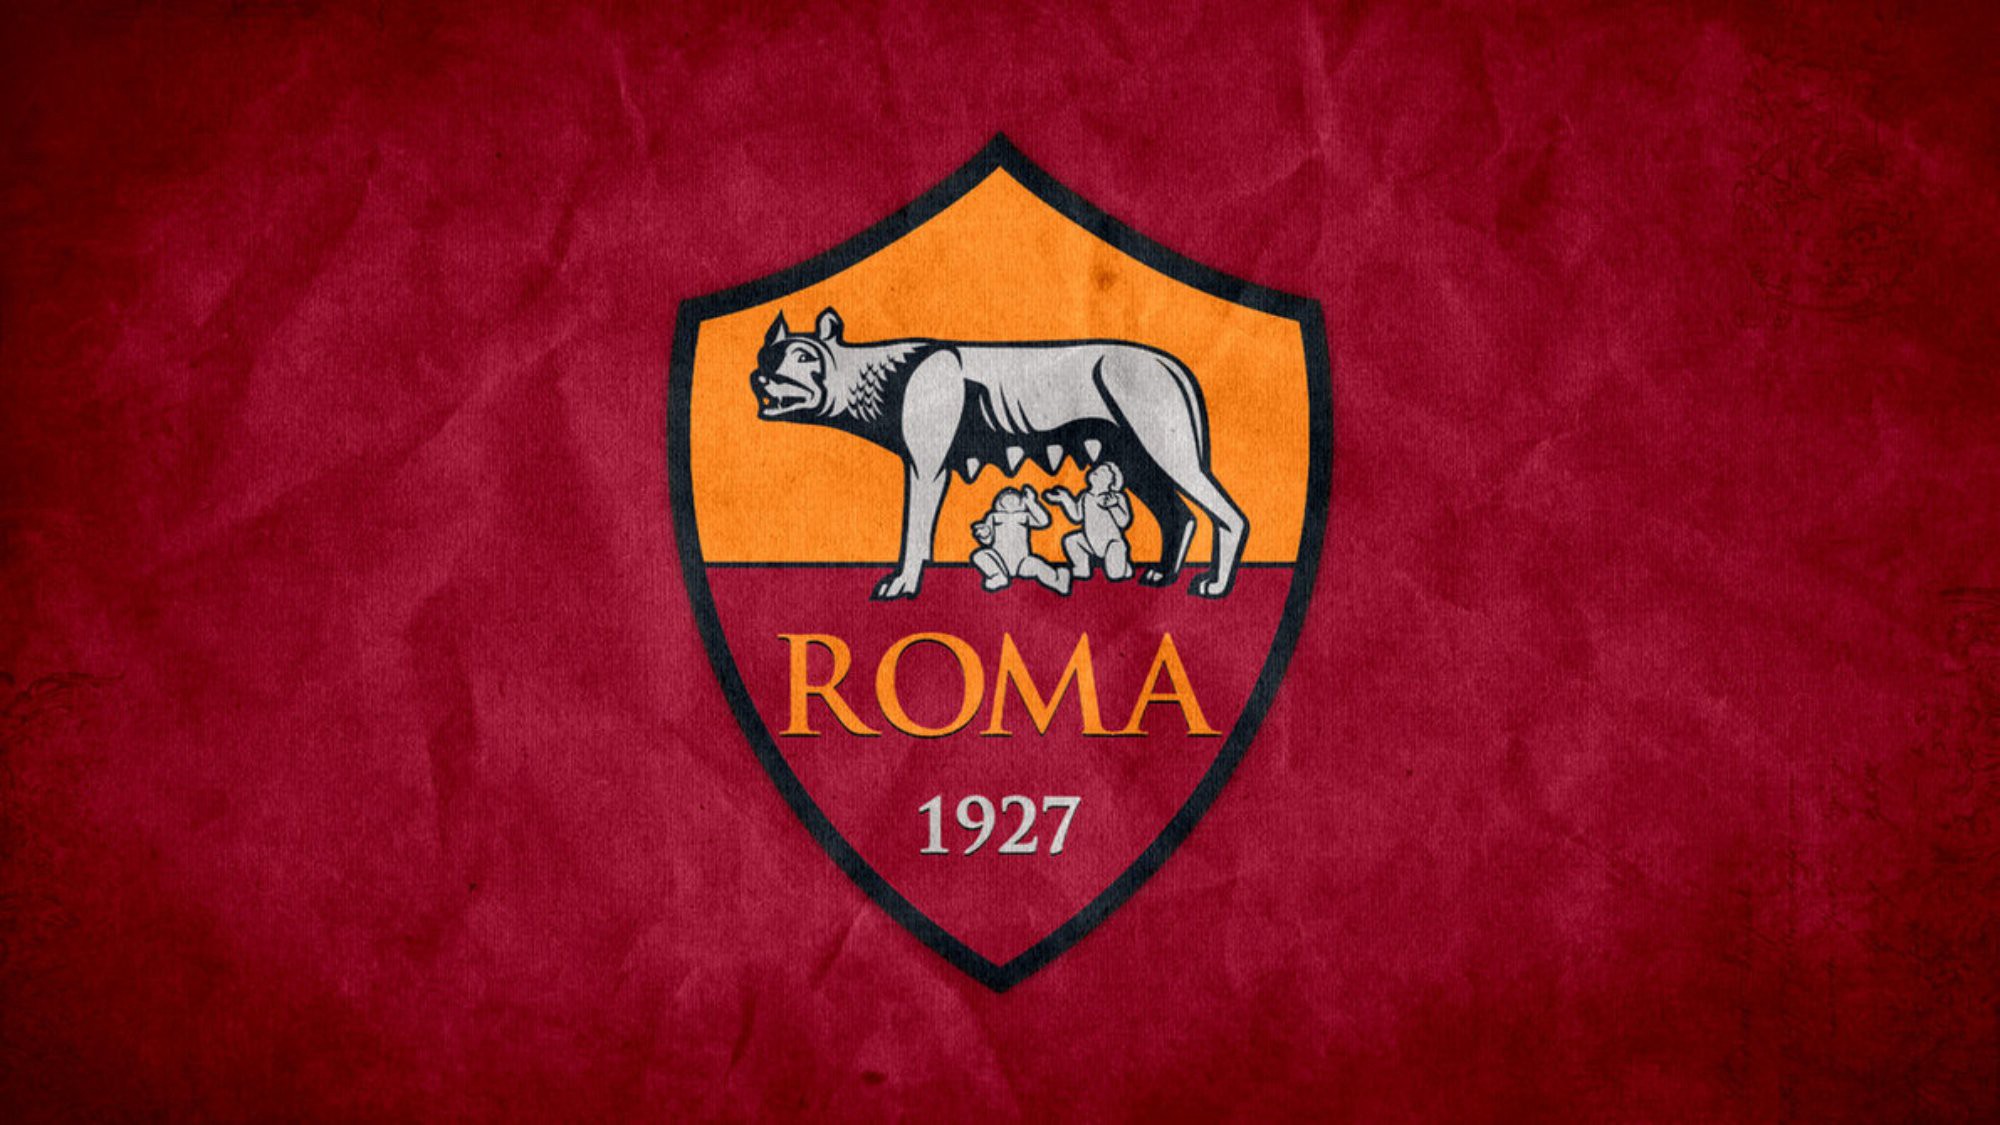 AS Roma opened the Swahili twitter account on Wednesday. www.businesstoday.co.ke